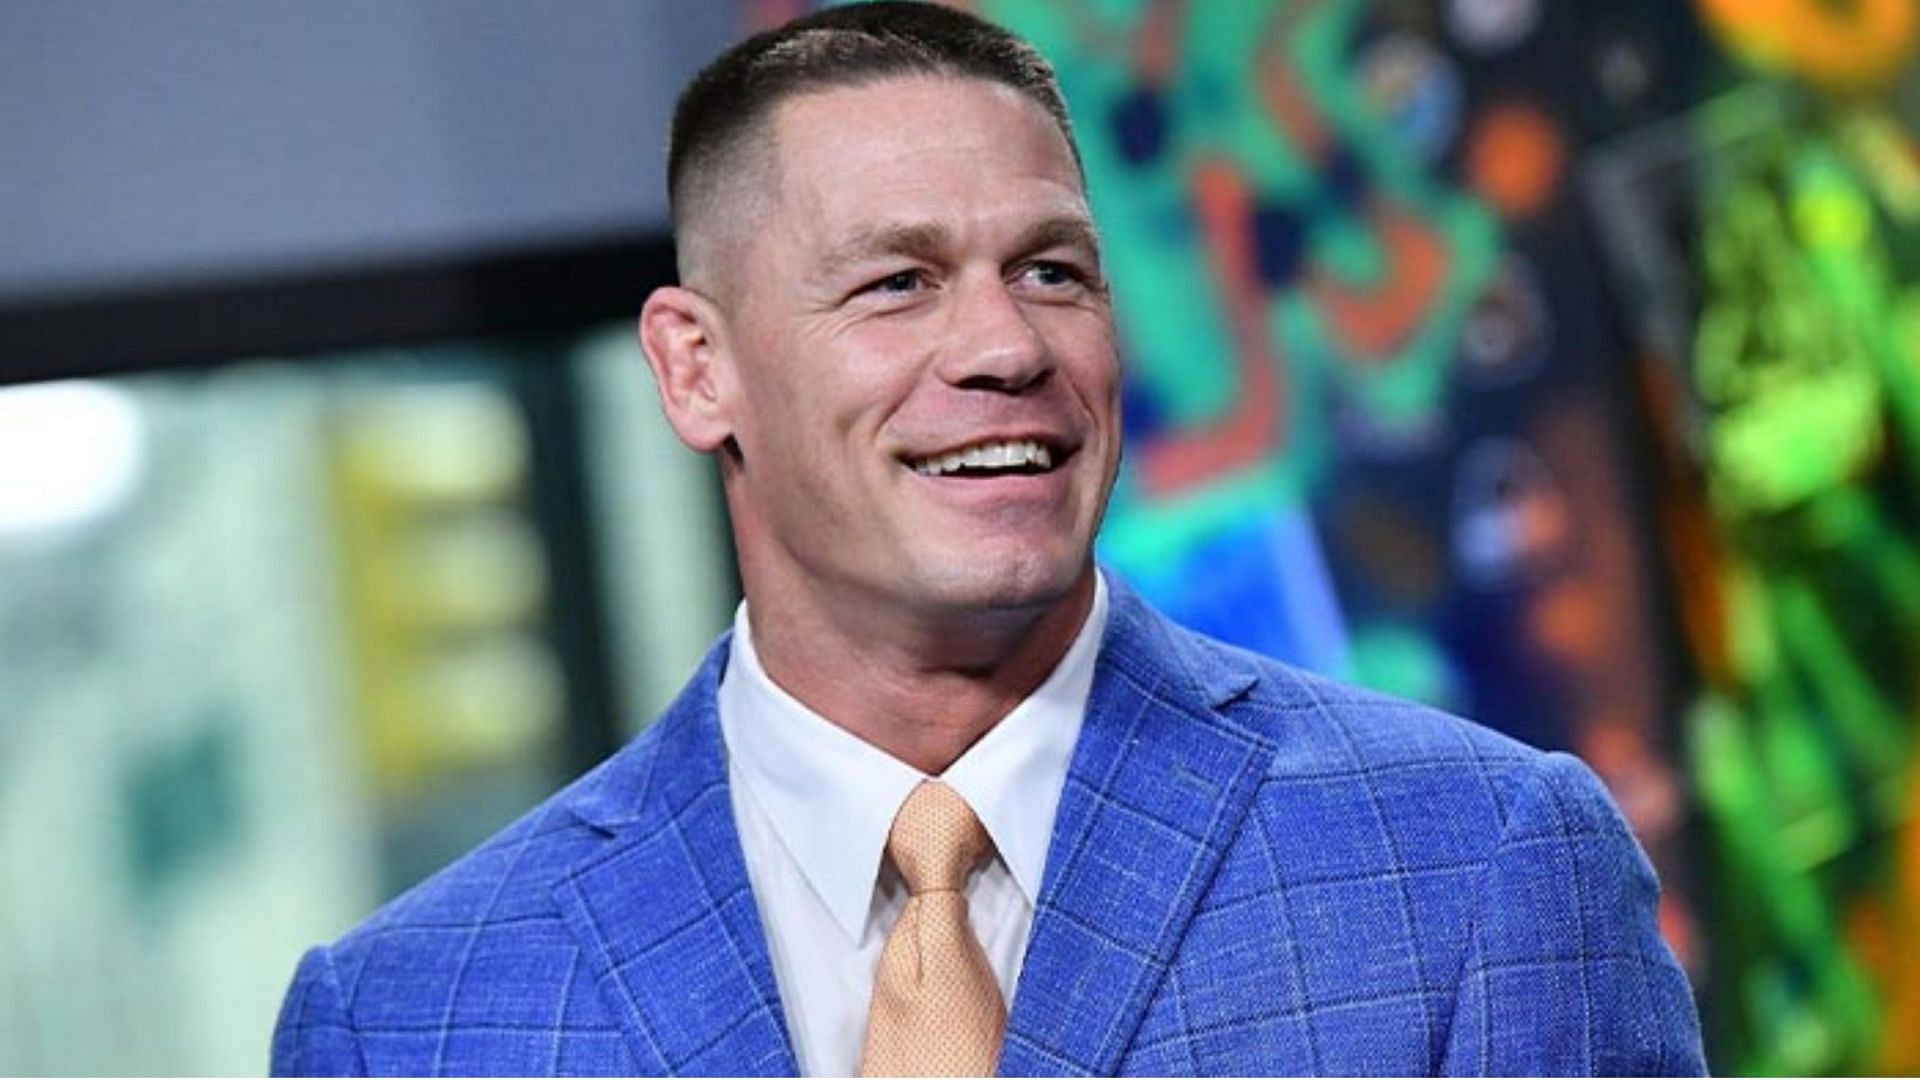 John Cena looks completely different in his new look